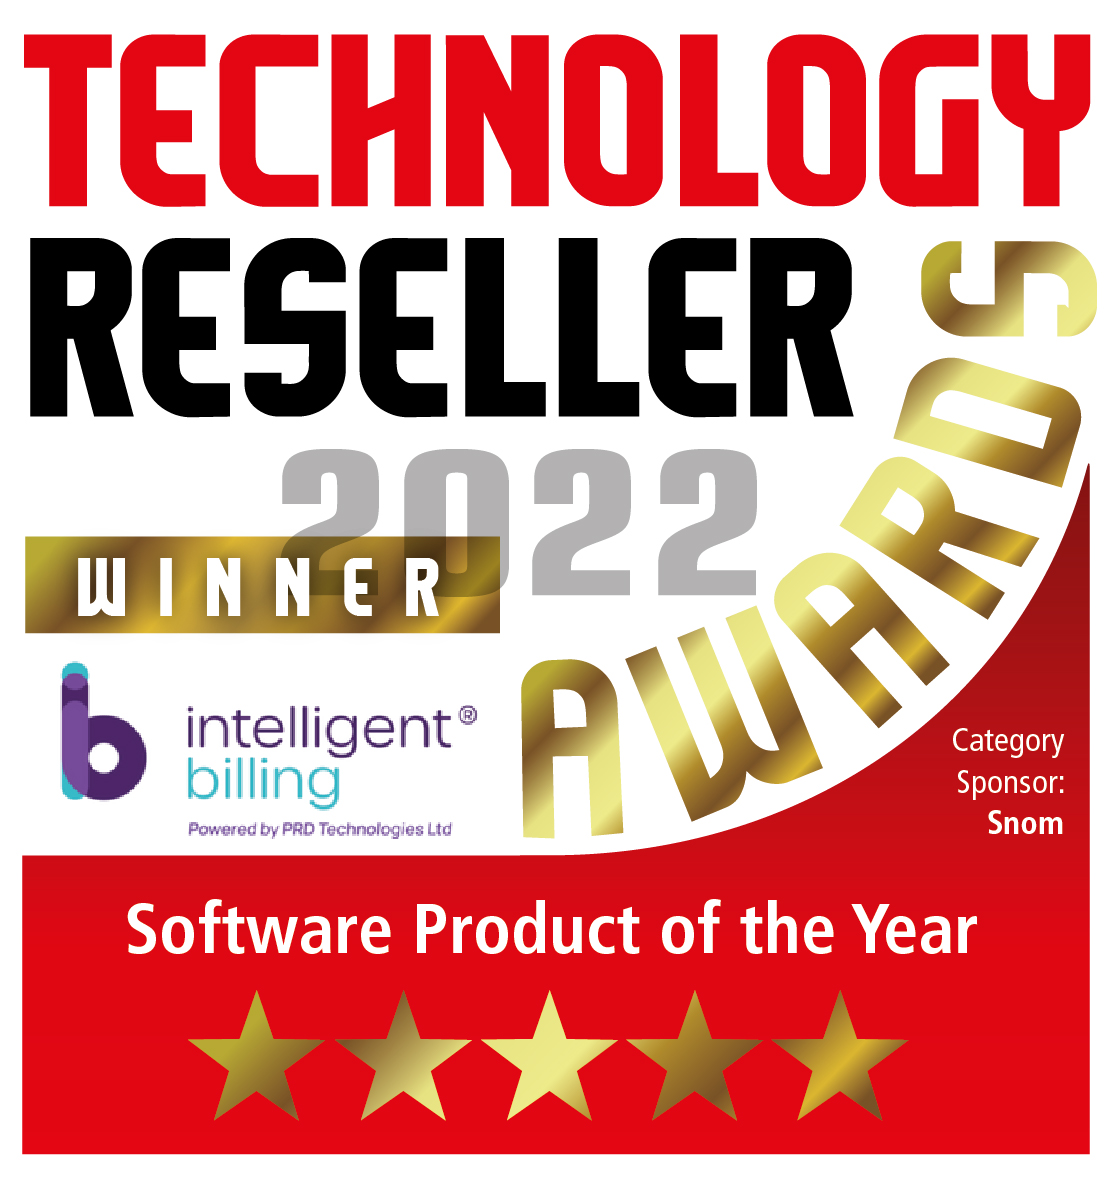 Software Product of the Year